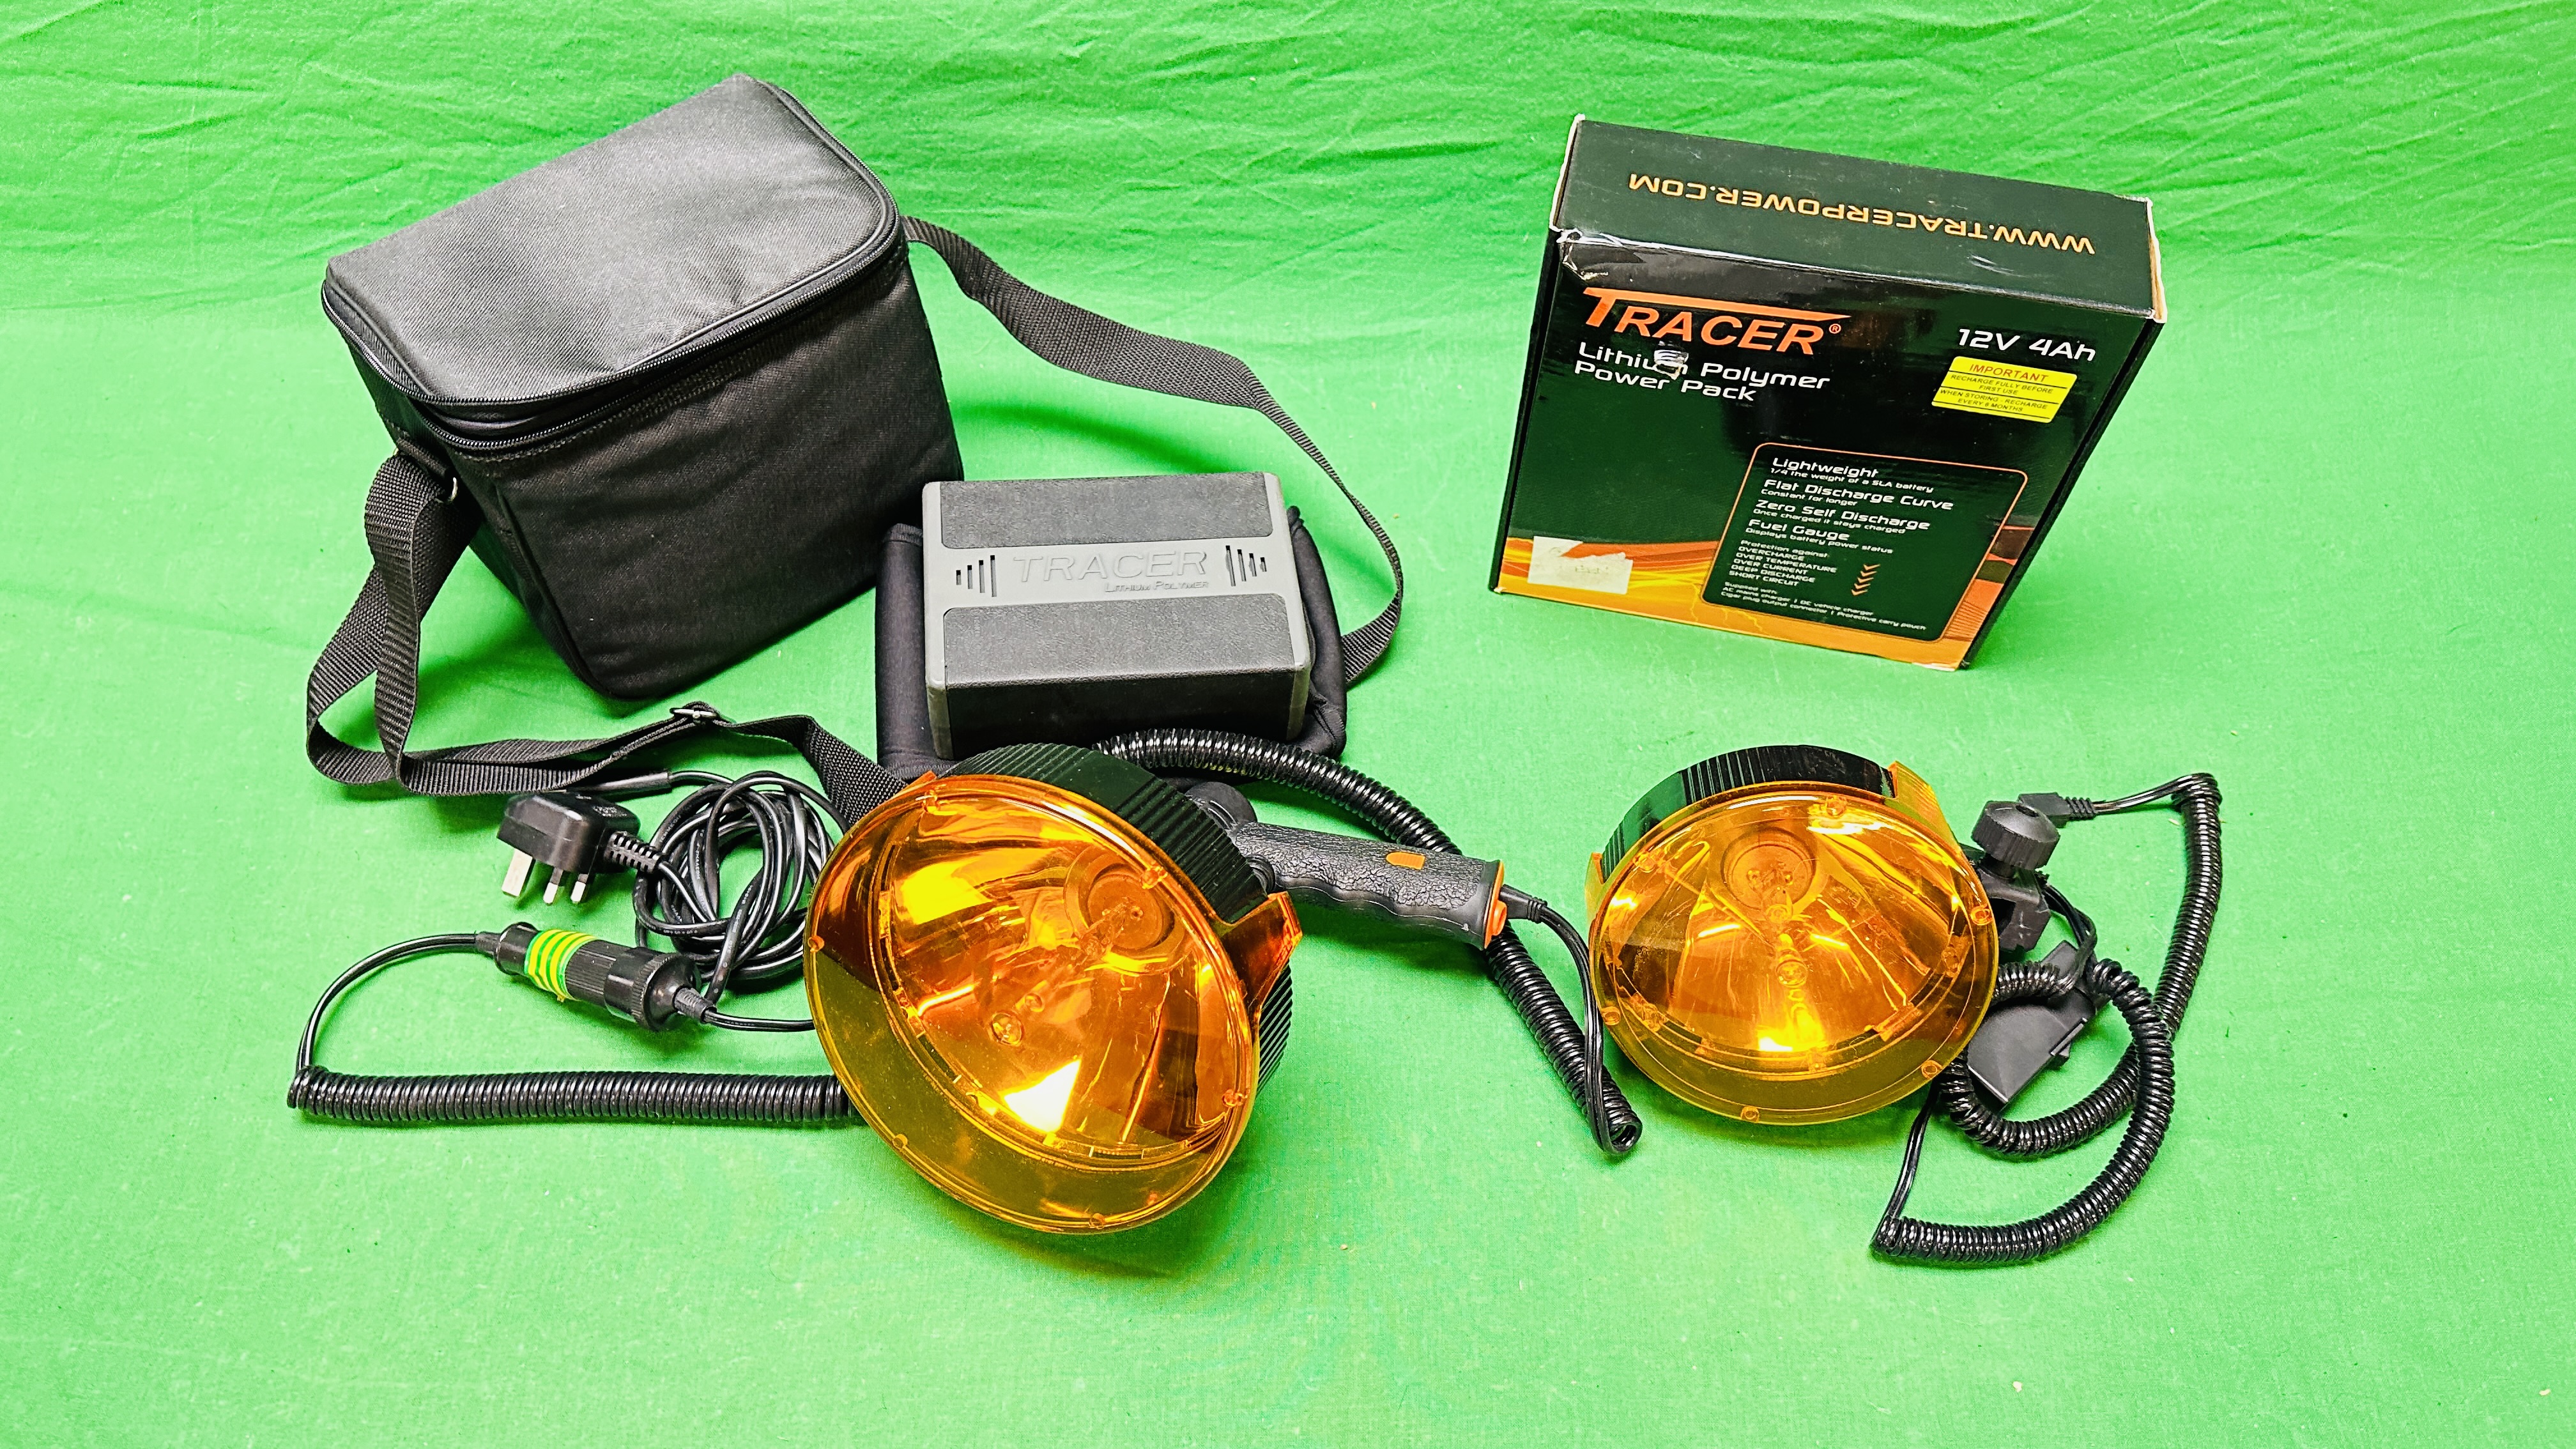 2 X TRACER LAMP LIGHTS WITH ORANGE FILTER COMPLETE WITH BOXED TRACER 12V 4AH BATTERY PACK AND - Bild 2 aus 13